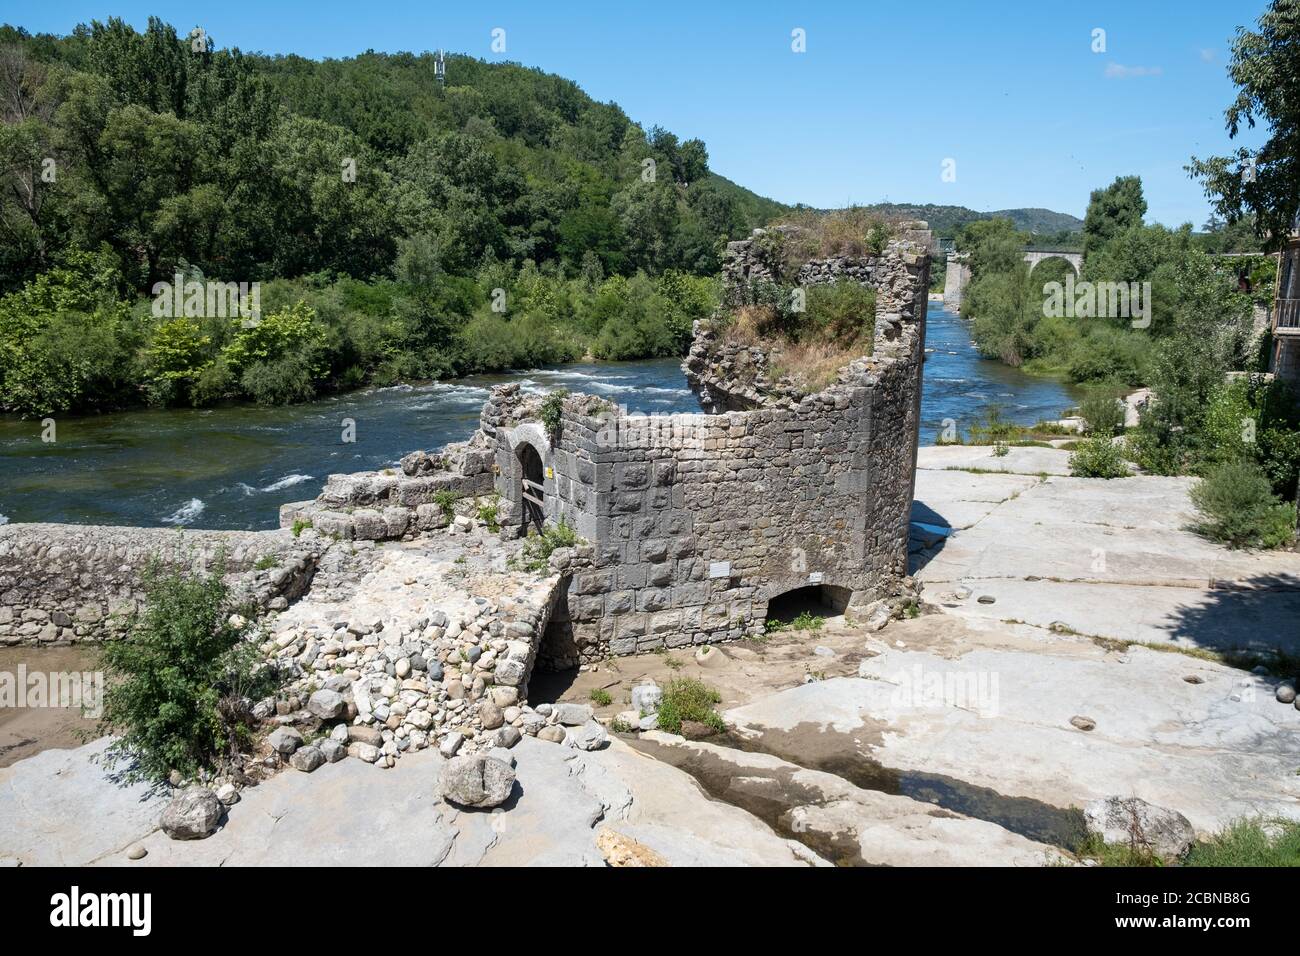 Ardeche France, view of the village of Vogue in Ardeche. France Stock Photo